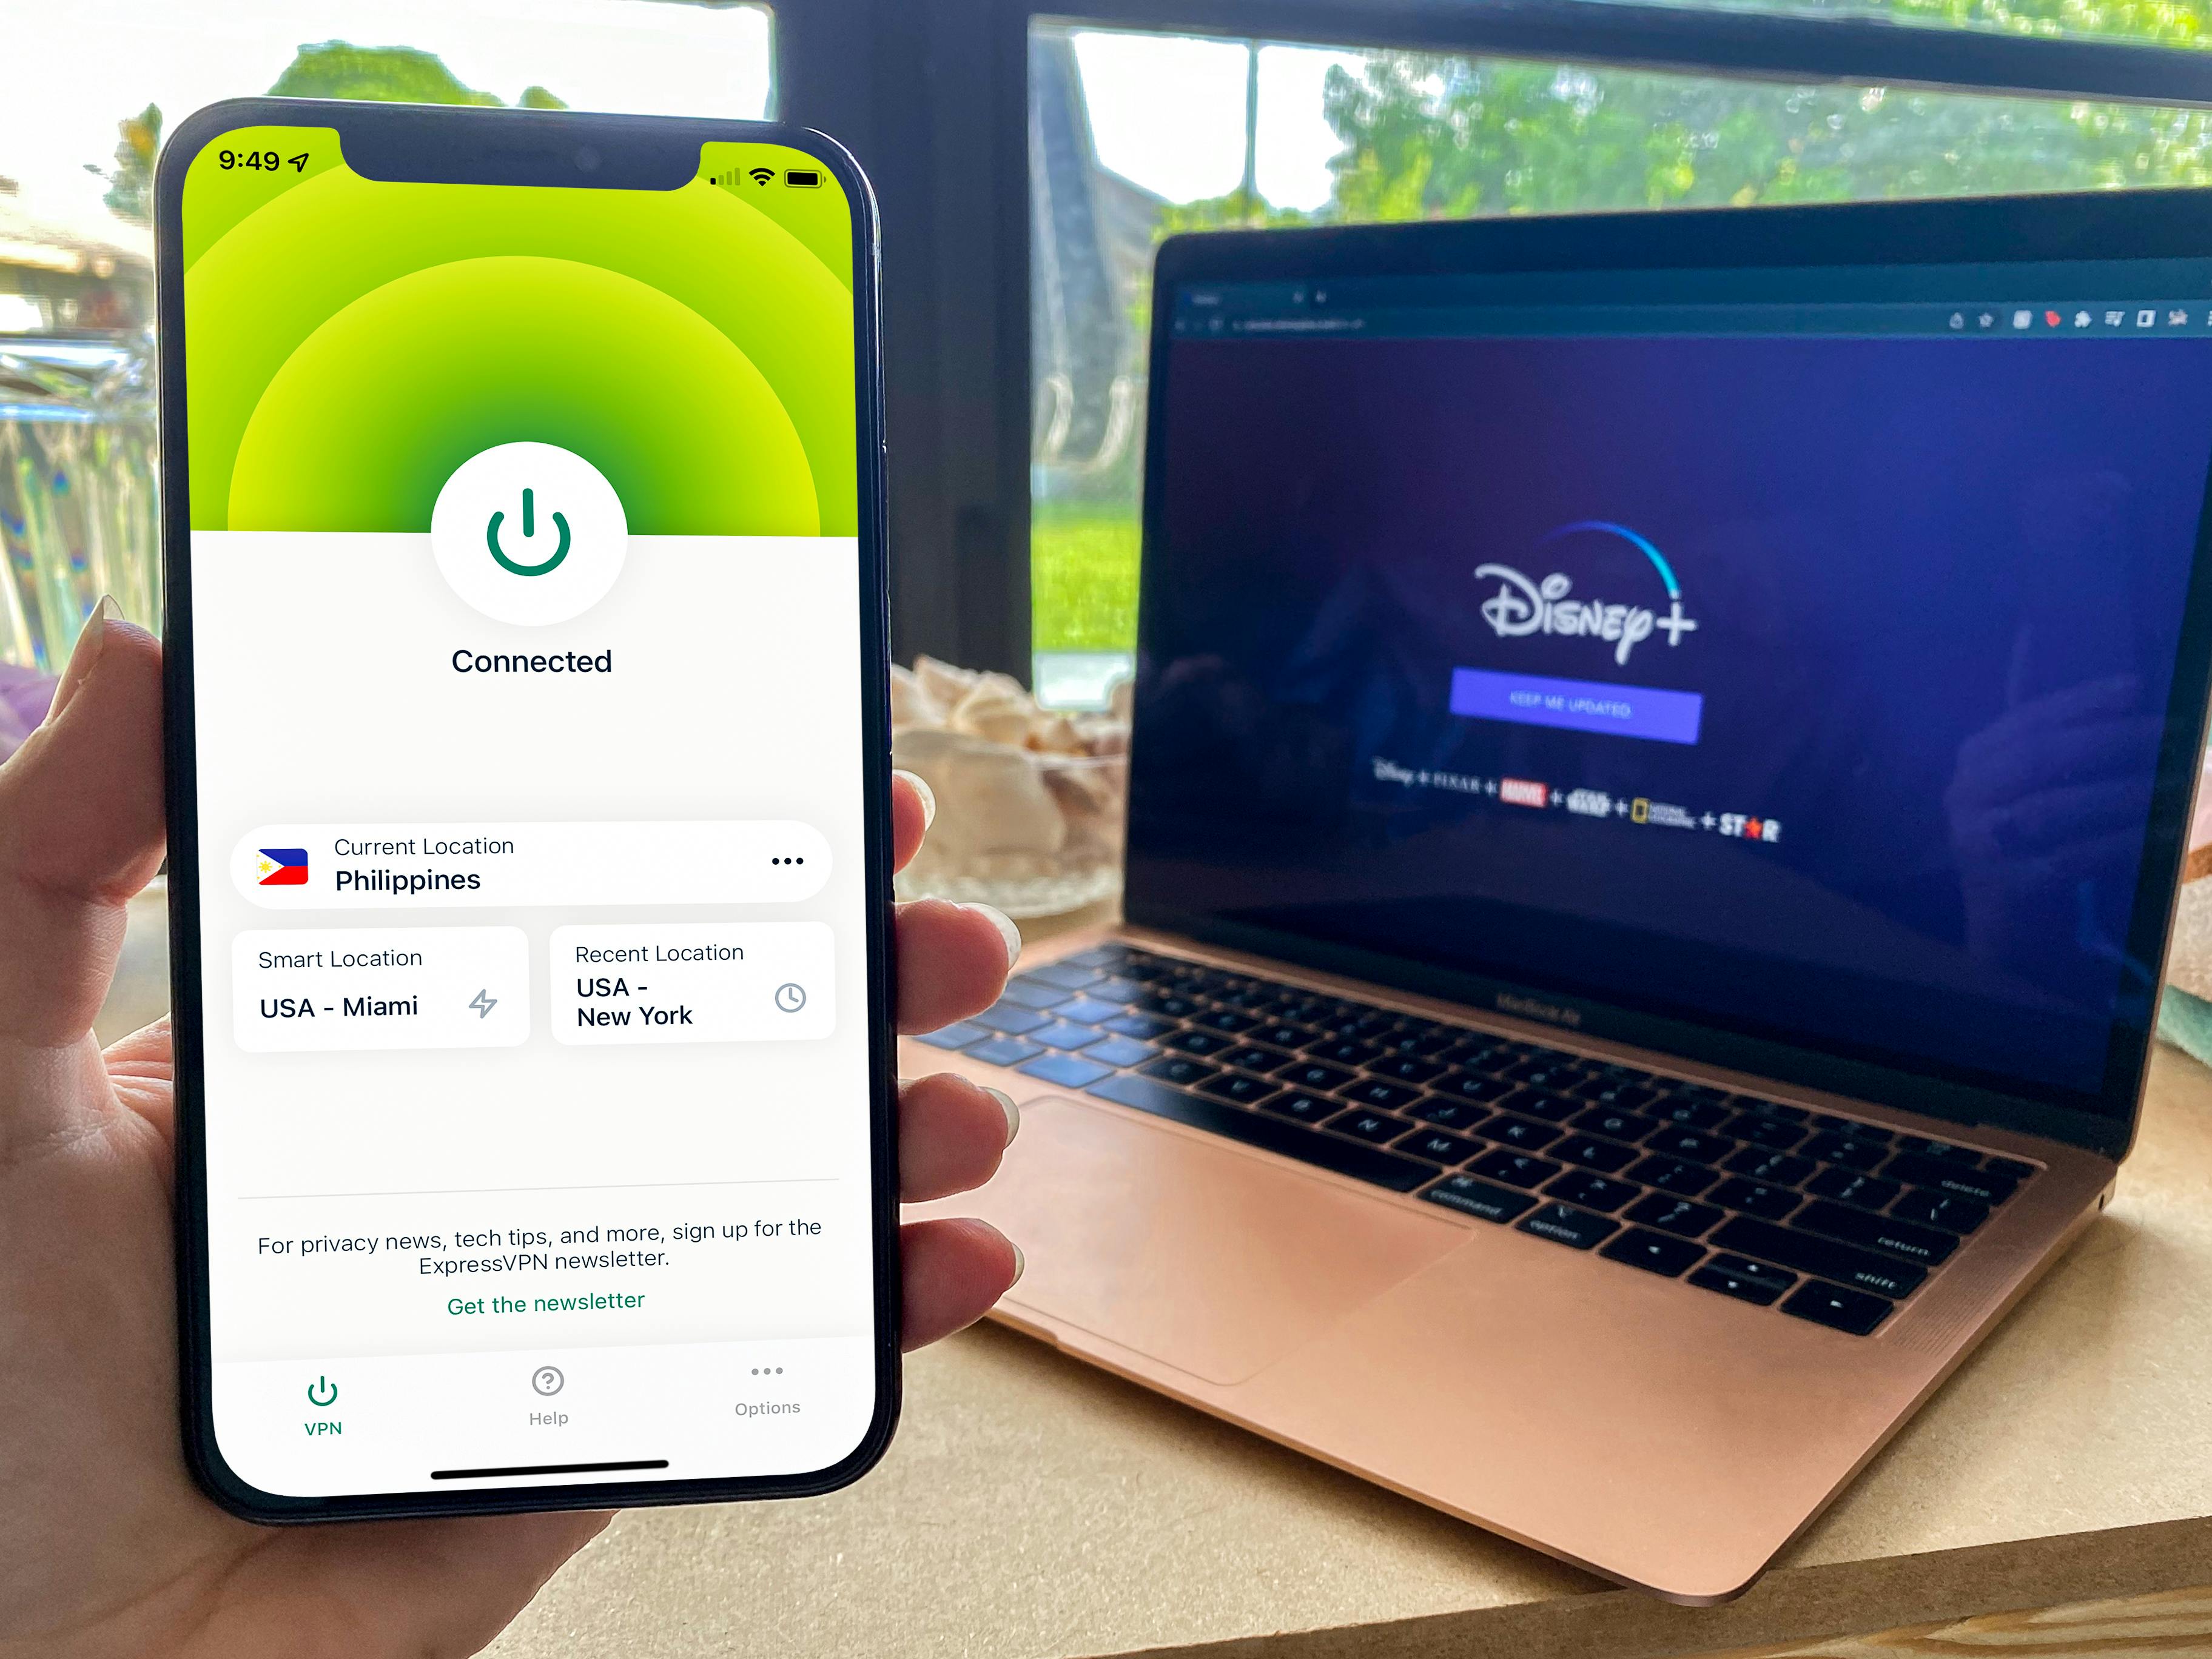 phone with VPN app and laptop showing Disney Plus in background